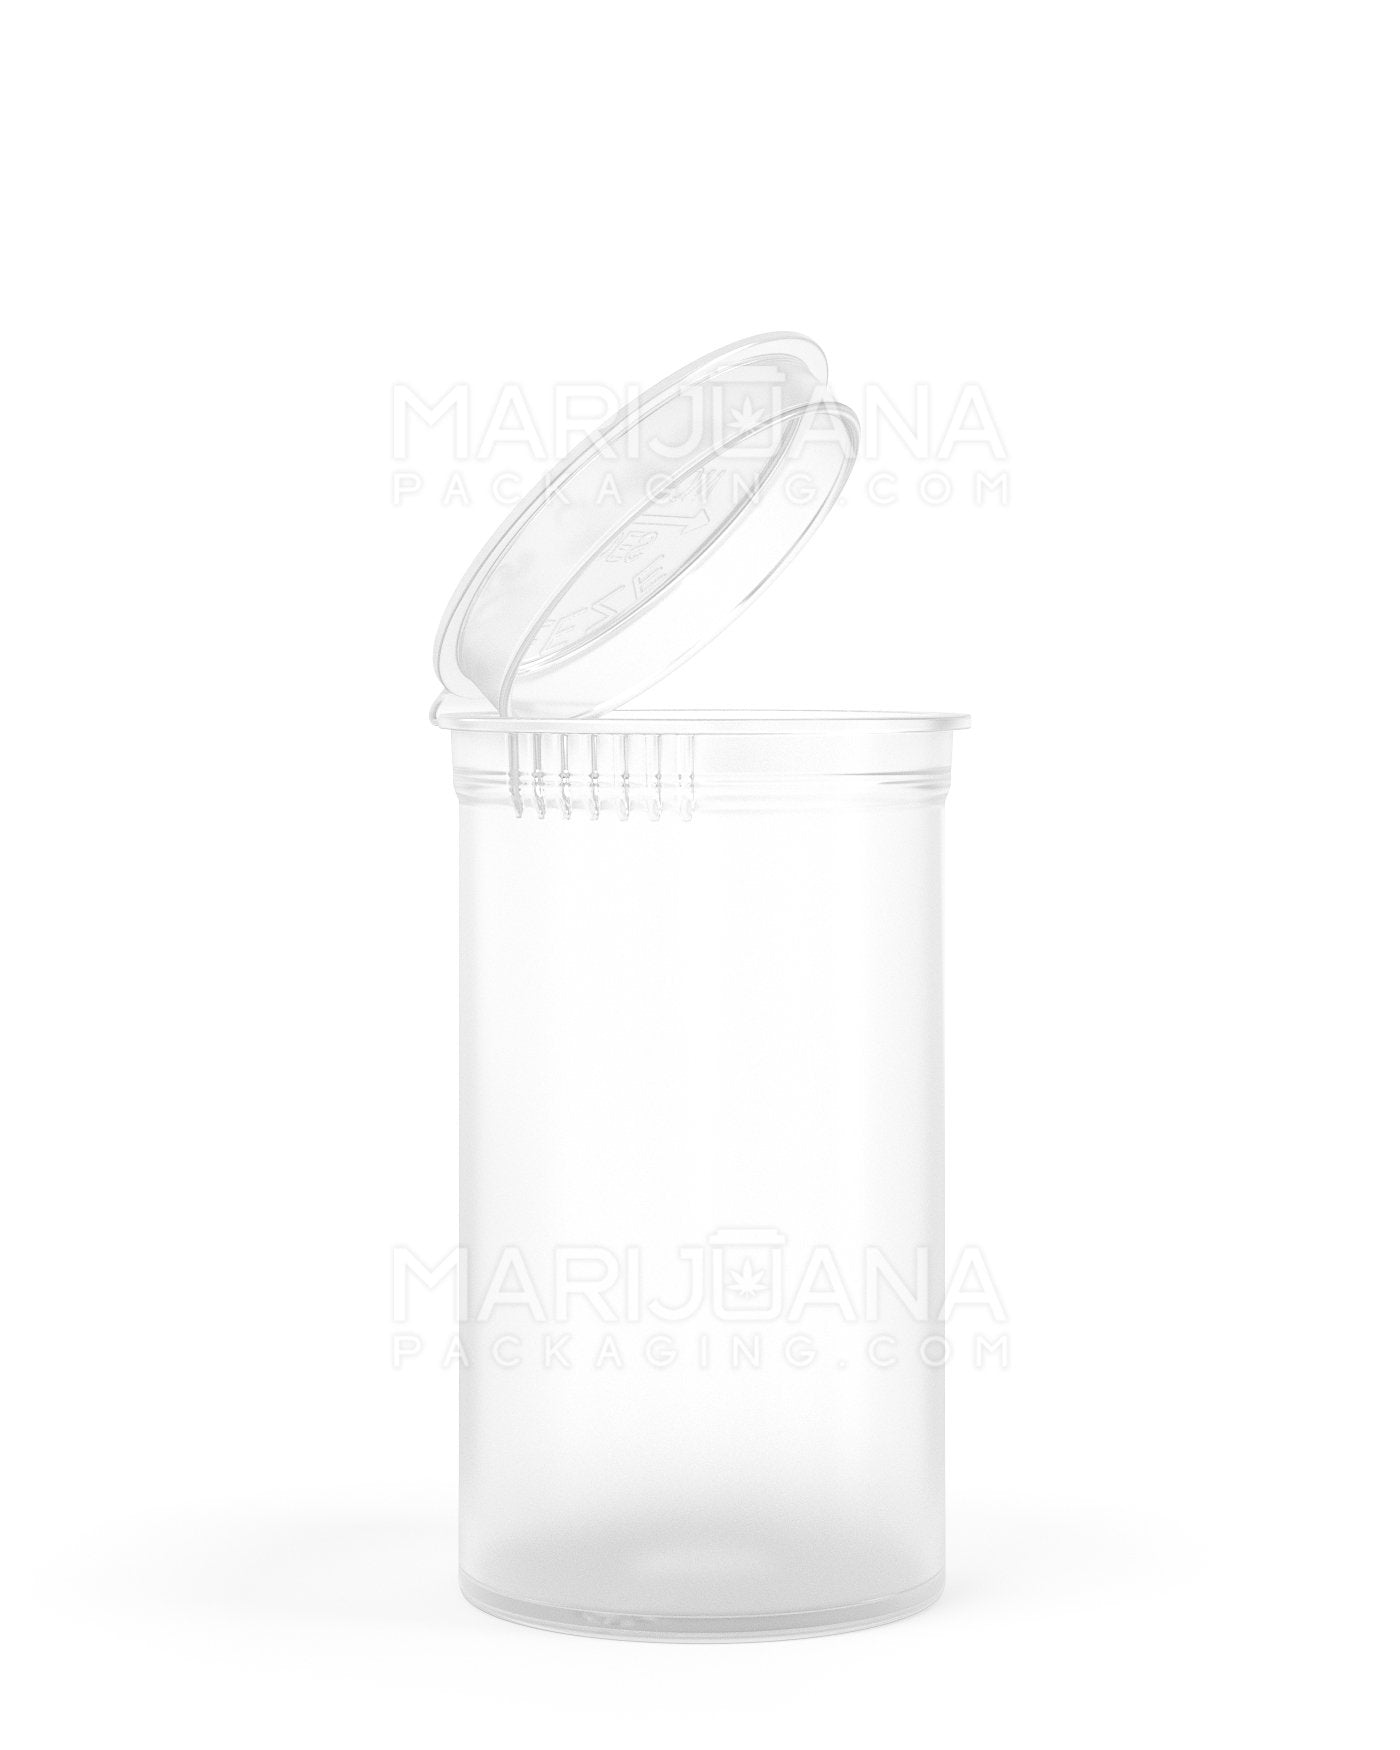 Child Resistant & Sustainable 100% Biodegradable Clear Pop Top Bottles | 19dr - 3.5g | Sample - 1